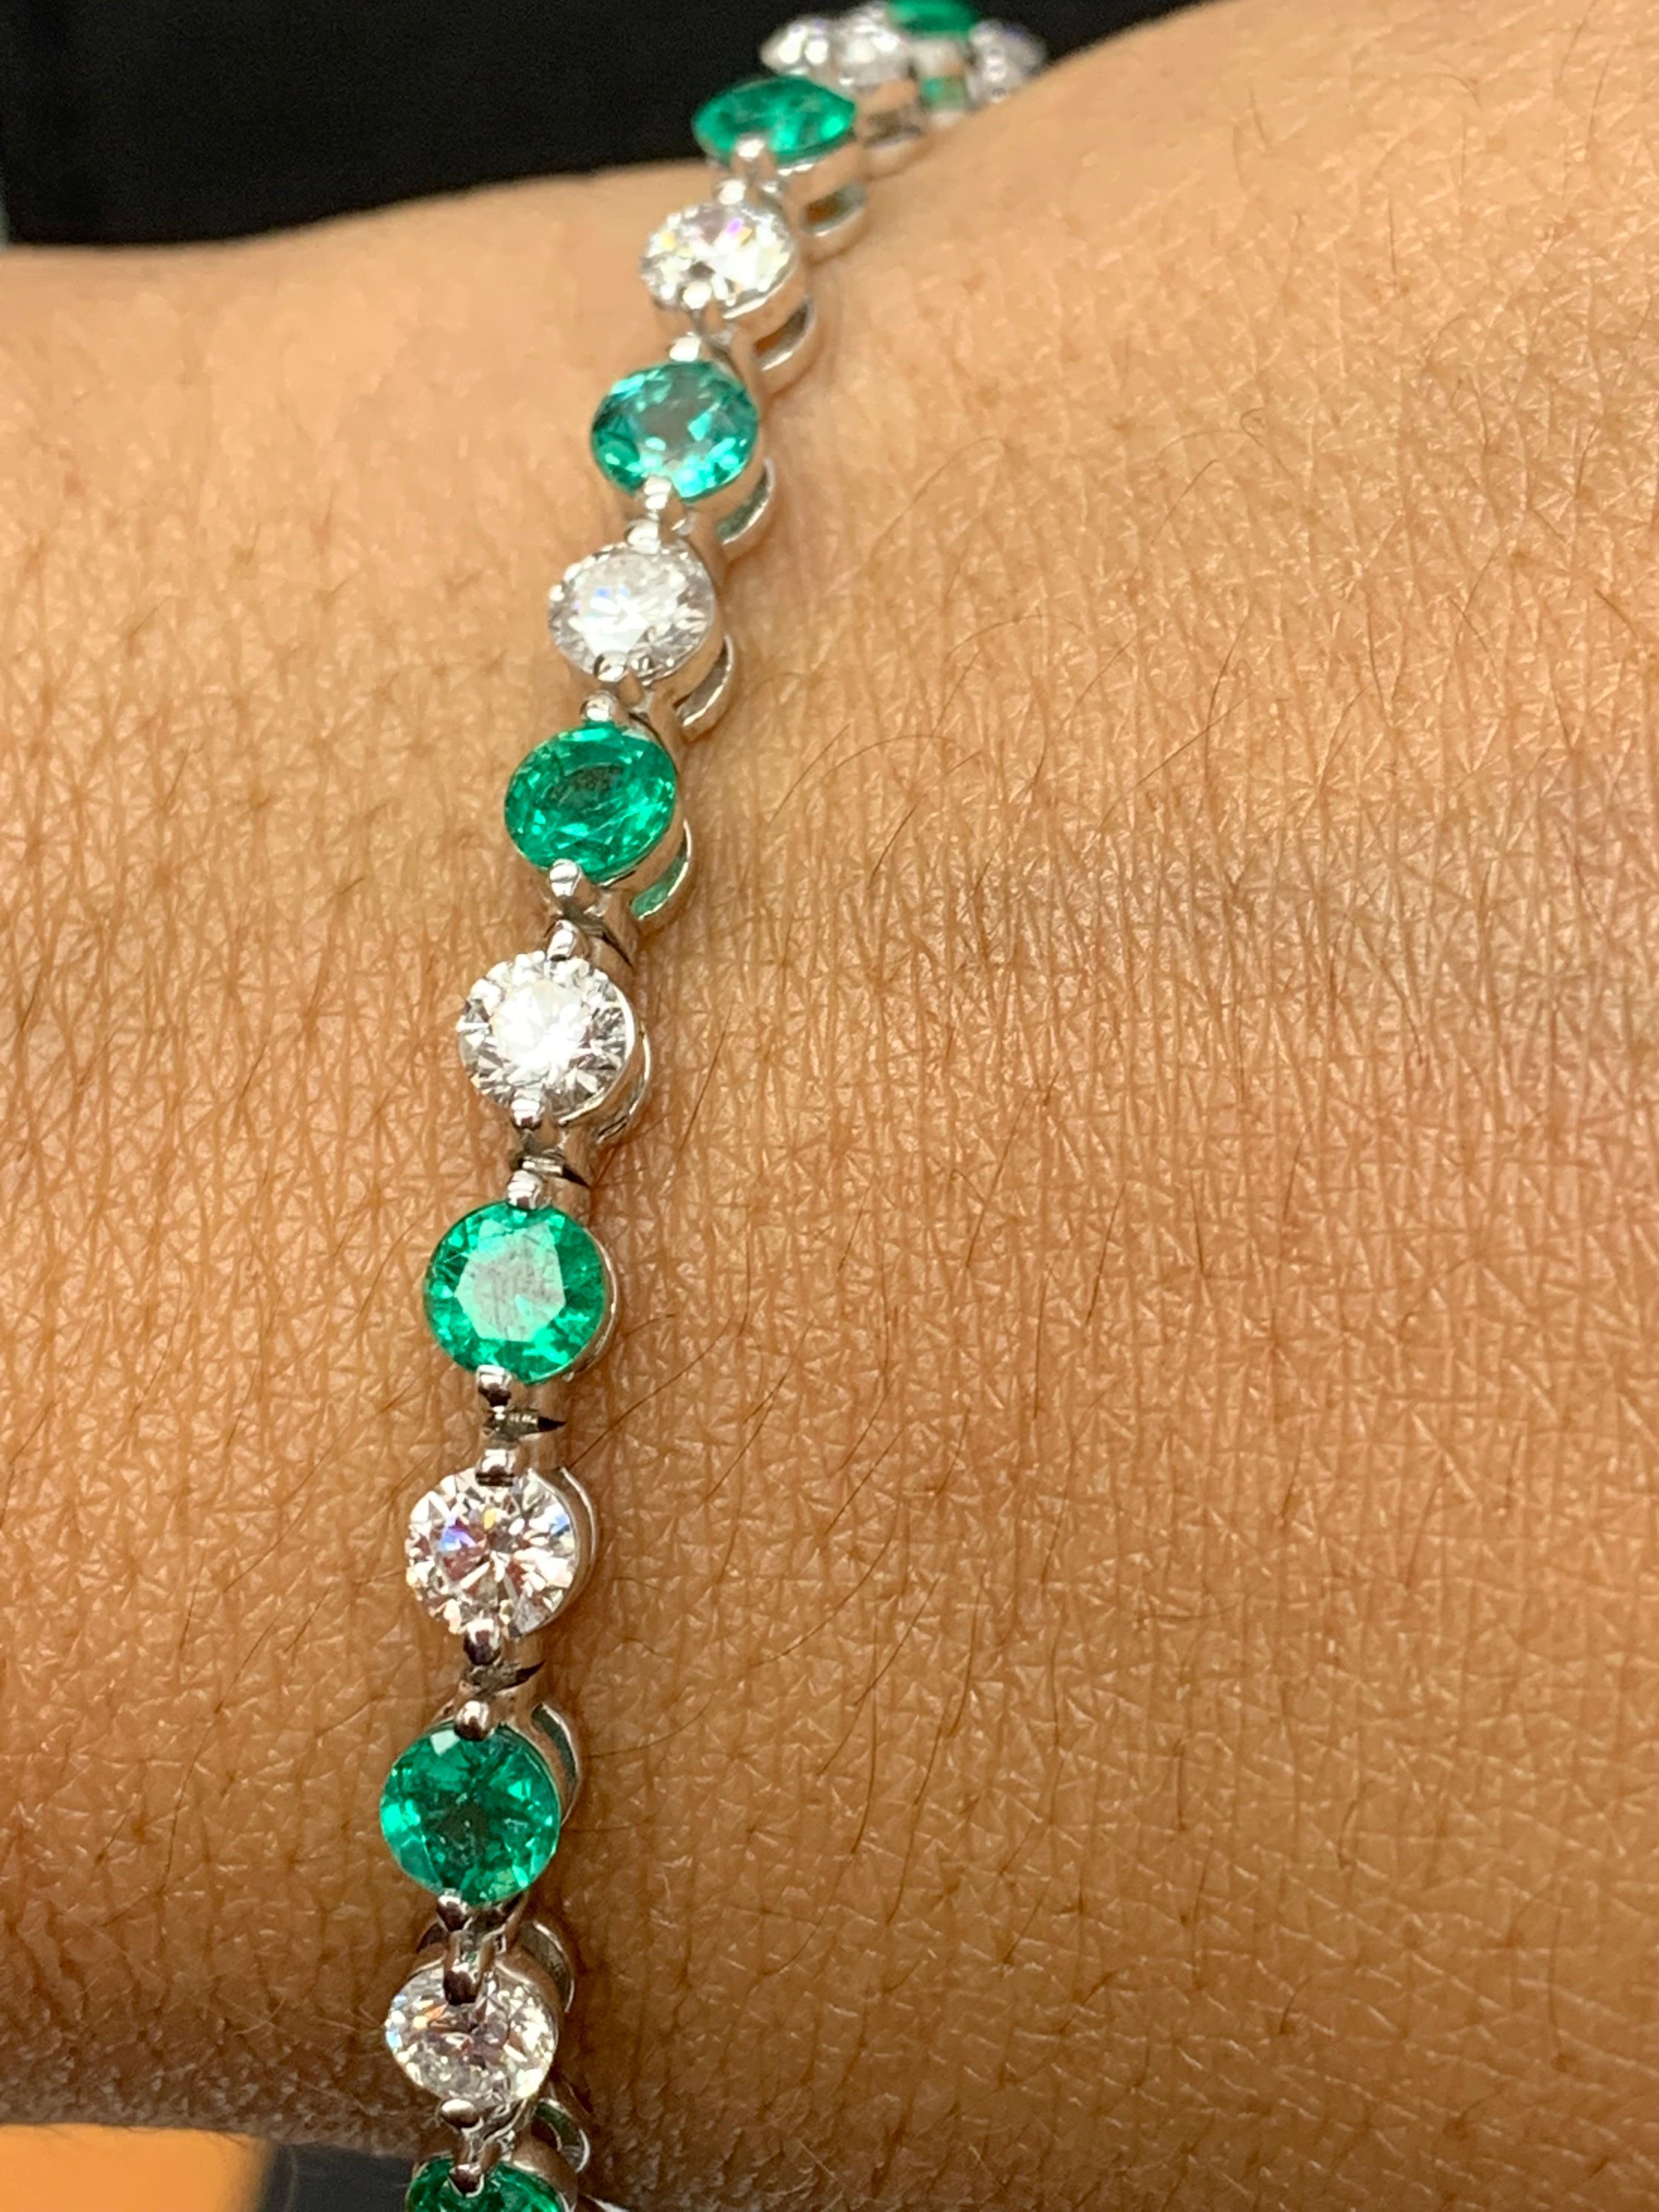 A stunning bracelet set with 16 Lush Green Emerald weighing 4.07 carat total. Alternating these emeralds are 16 sparkling round diamonds weighing 3.92 carats in total. Set in polished 14k white gold. Double lock mechanism for maximum security. A